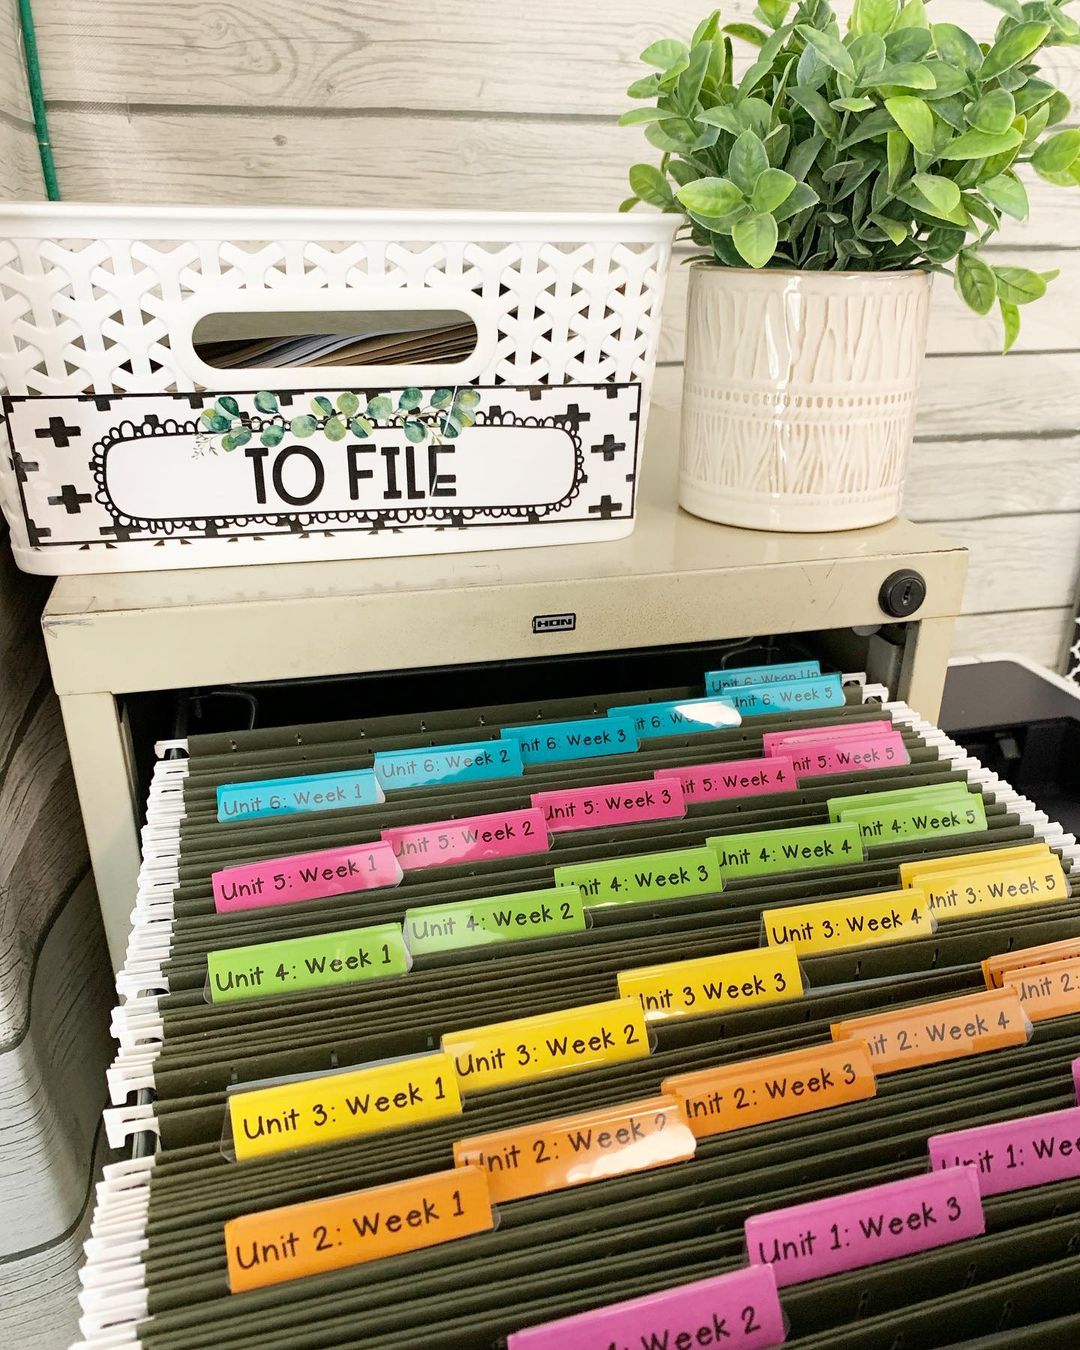 file draw with folder and colorful labels